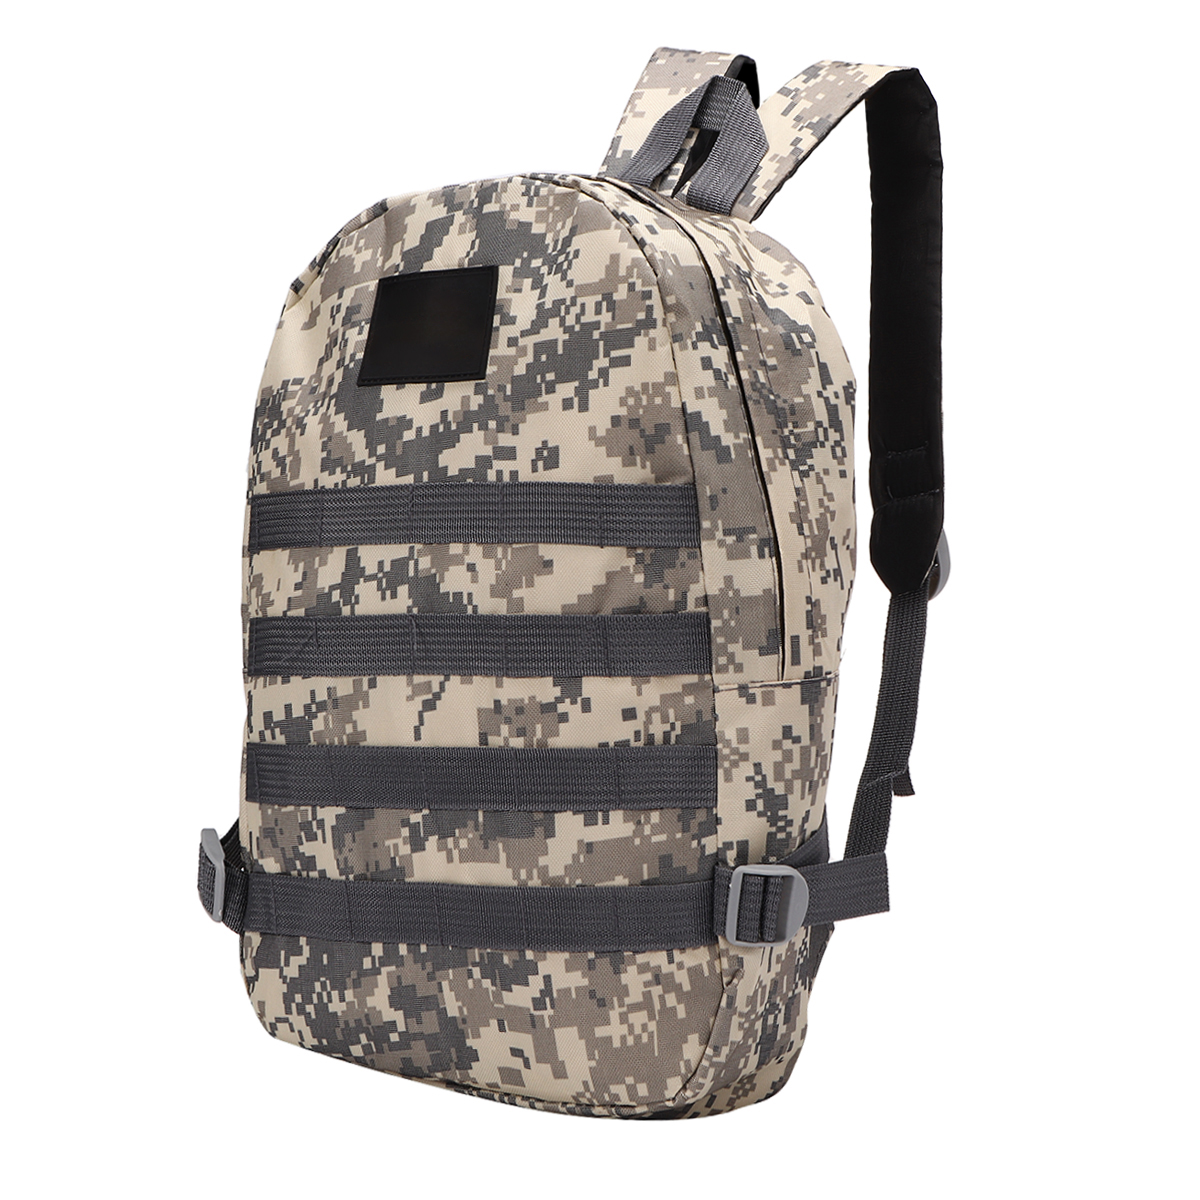 Camouflage-Large-Capacity-Oxford-Cloth-Macbook-Mobile-Phone-Storage-Bag-Backpack-1860030-2